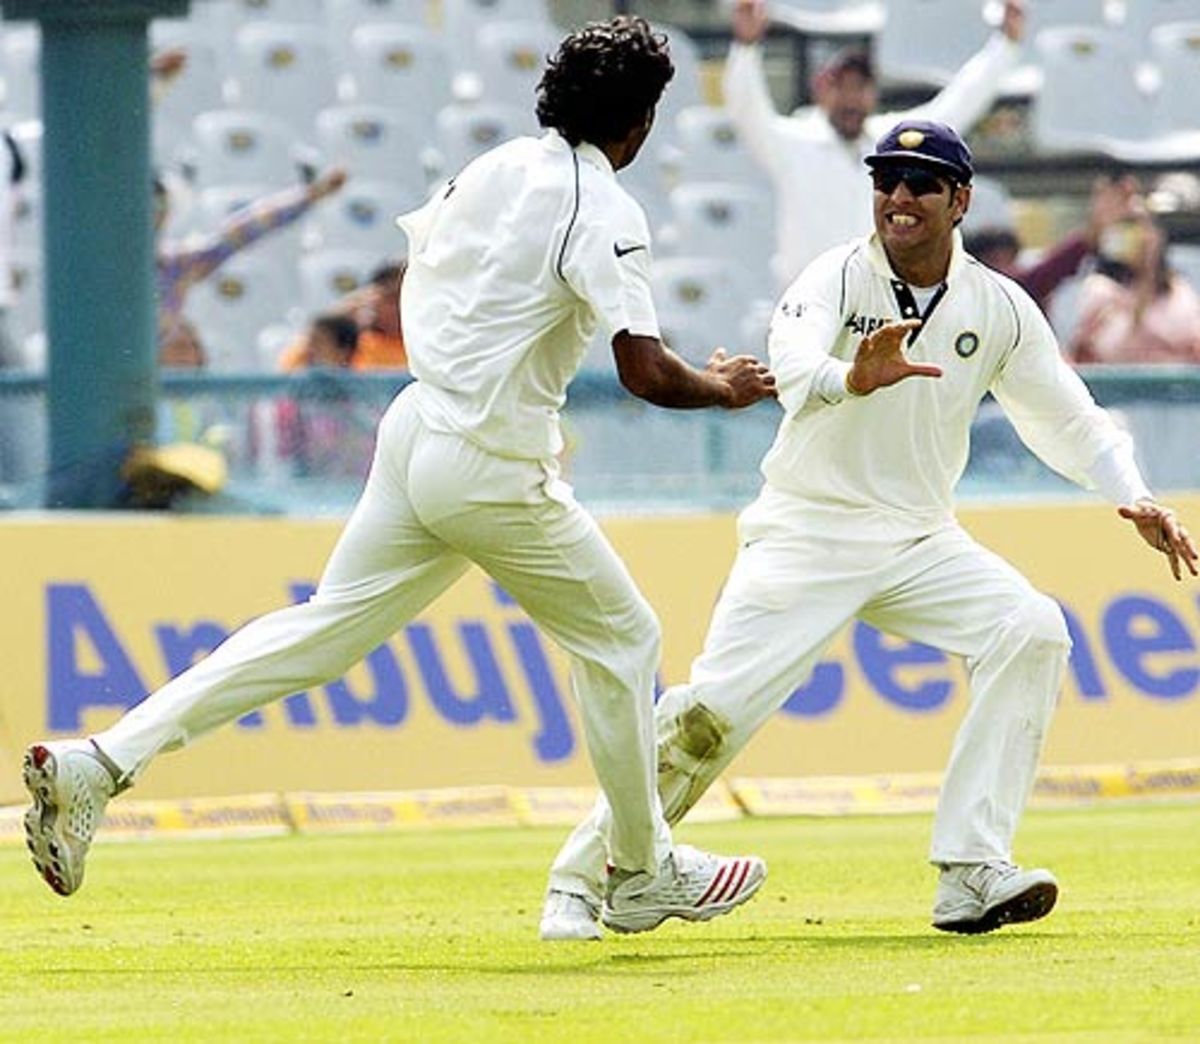 Munaf and Yuvraj celebrates a wicket during a match against England at Mohali in 2006